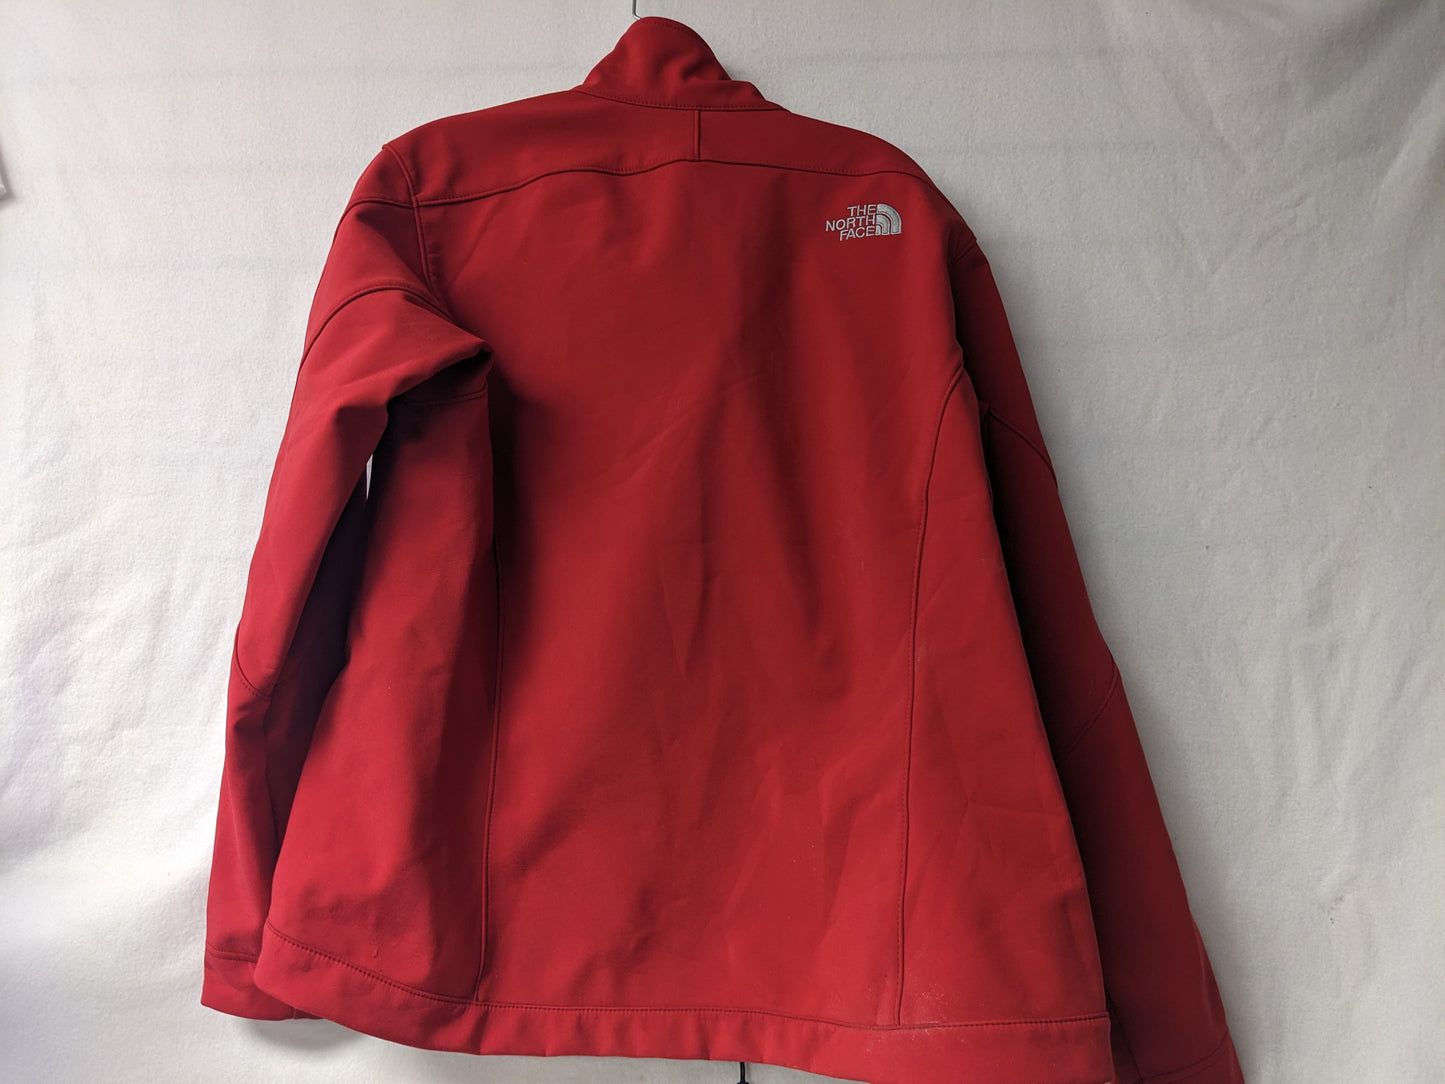 The North Face TNF Apex Women's Jacket/Coat Size Women Large Color Red Condition Use